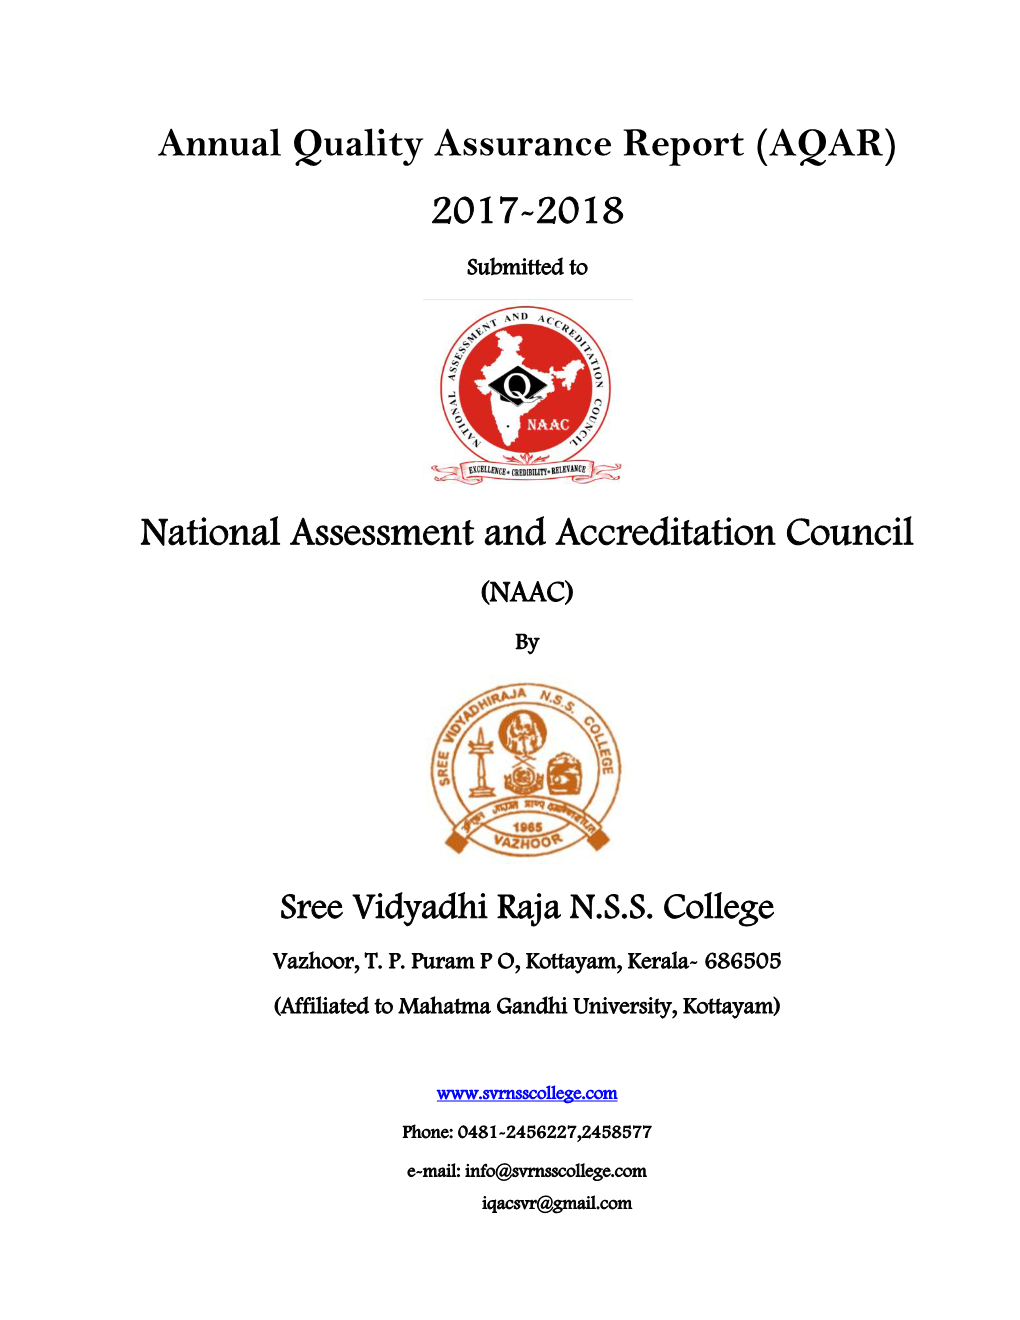 Annual Quality Assurance Report (AQAR) 2017-2018 National Assessment and Accreditation Council